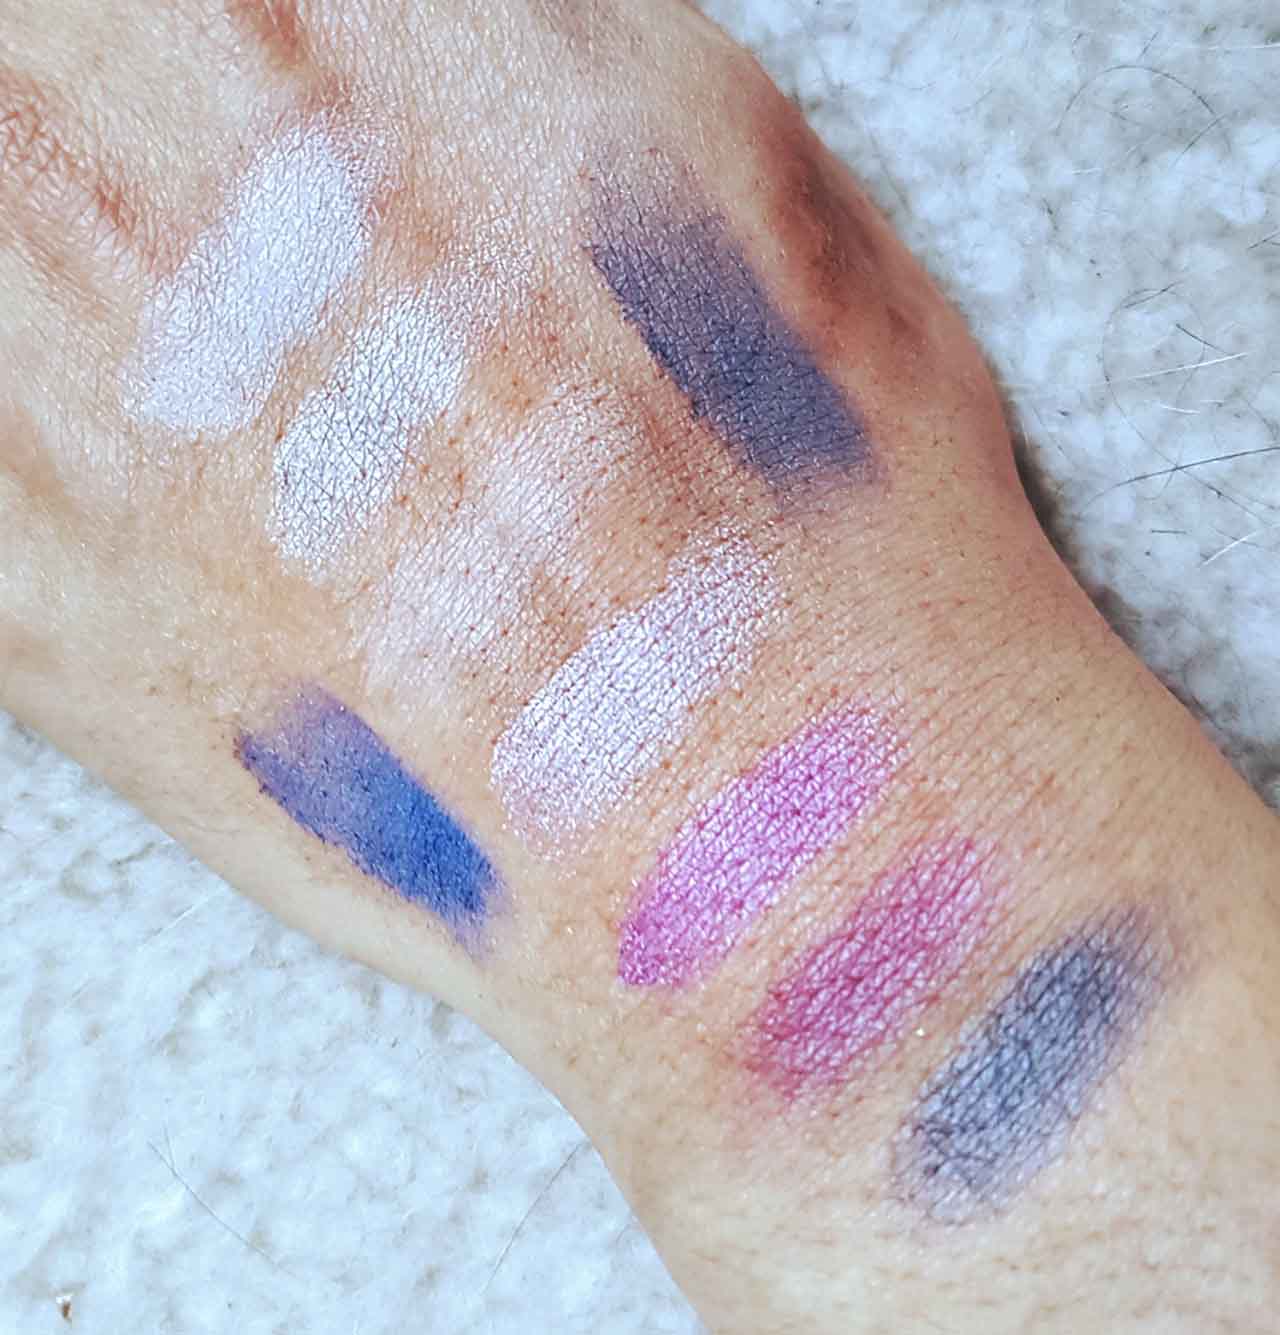 A Beauty Blogger's Weekend Makeup Haul: Even the paler colours swatch very well and there was very little fallout from any of the shadows. This palette would suit most skintones and could easily be used for daytime and nighttime looks.